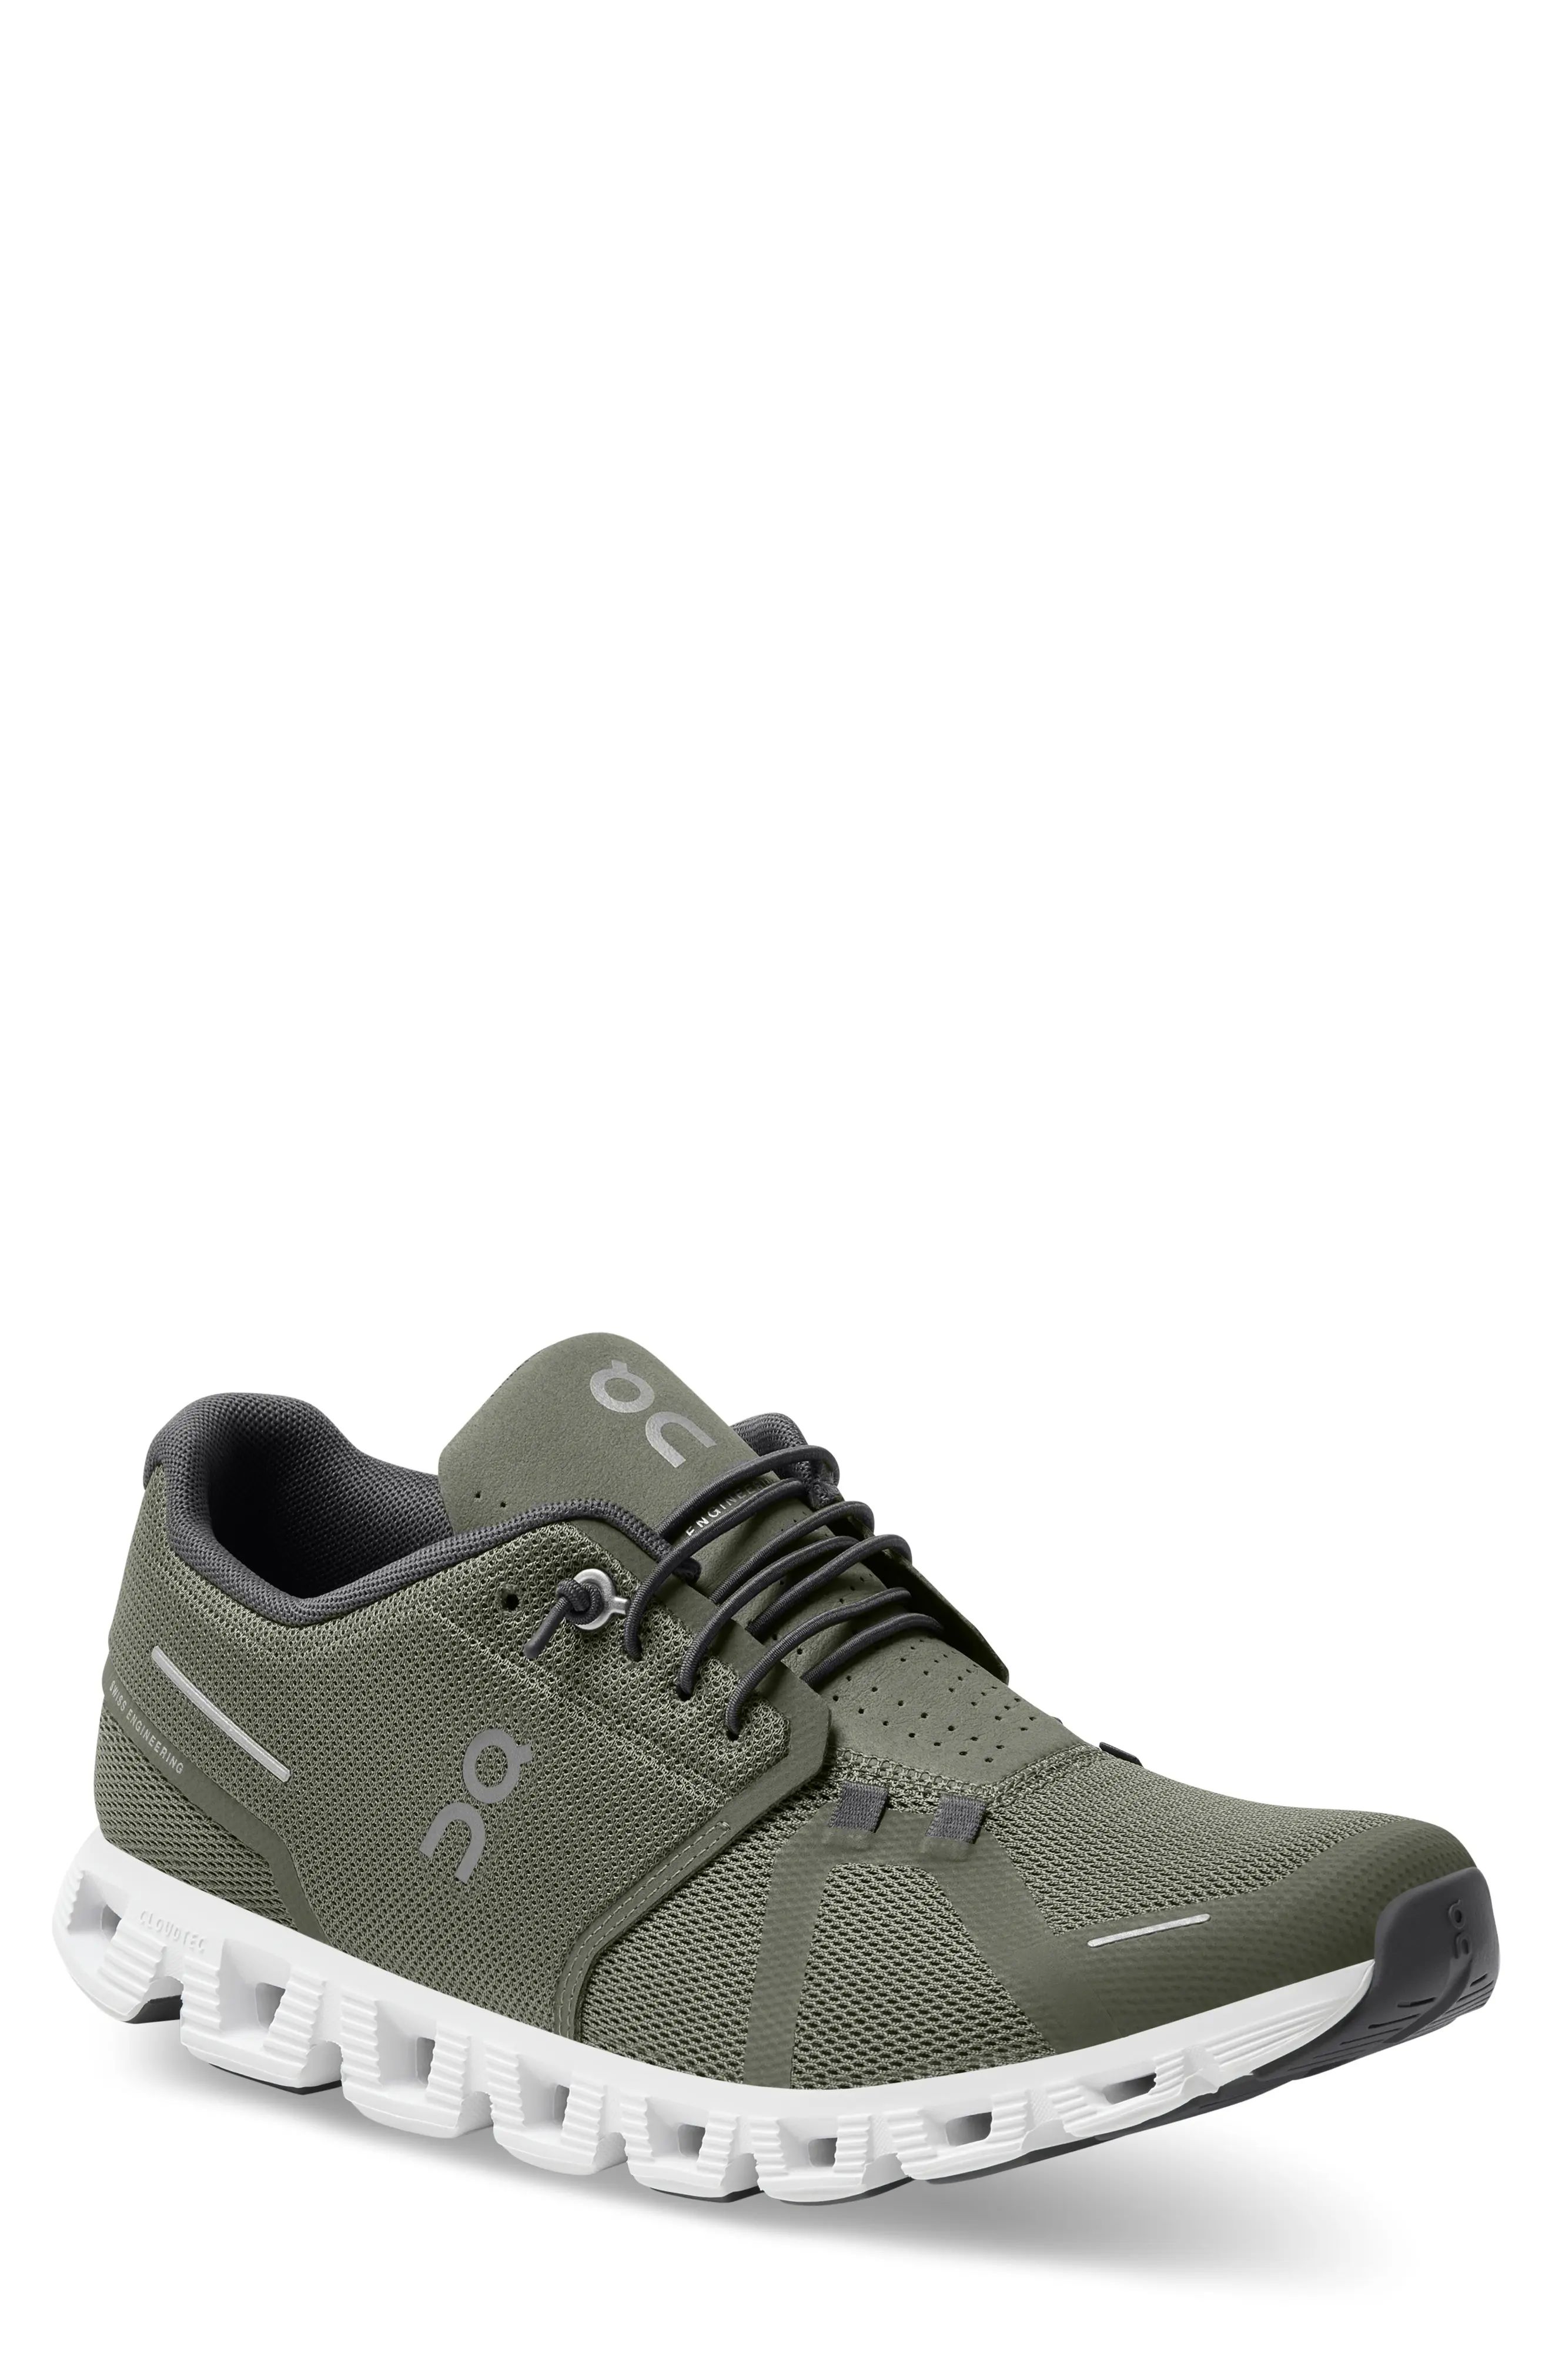 On Cloud 5 Running Shoe in Olive/White at Nordstrom, Size 8 | Nordstrom